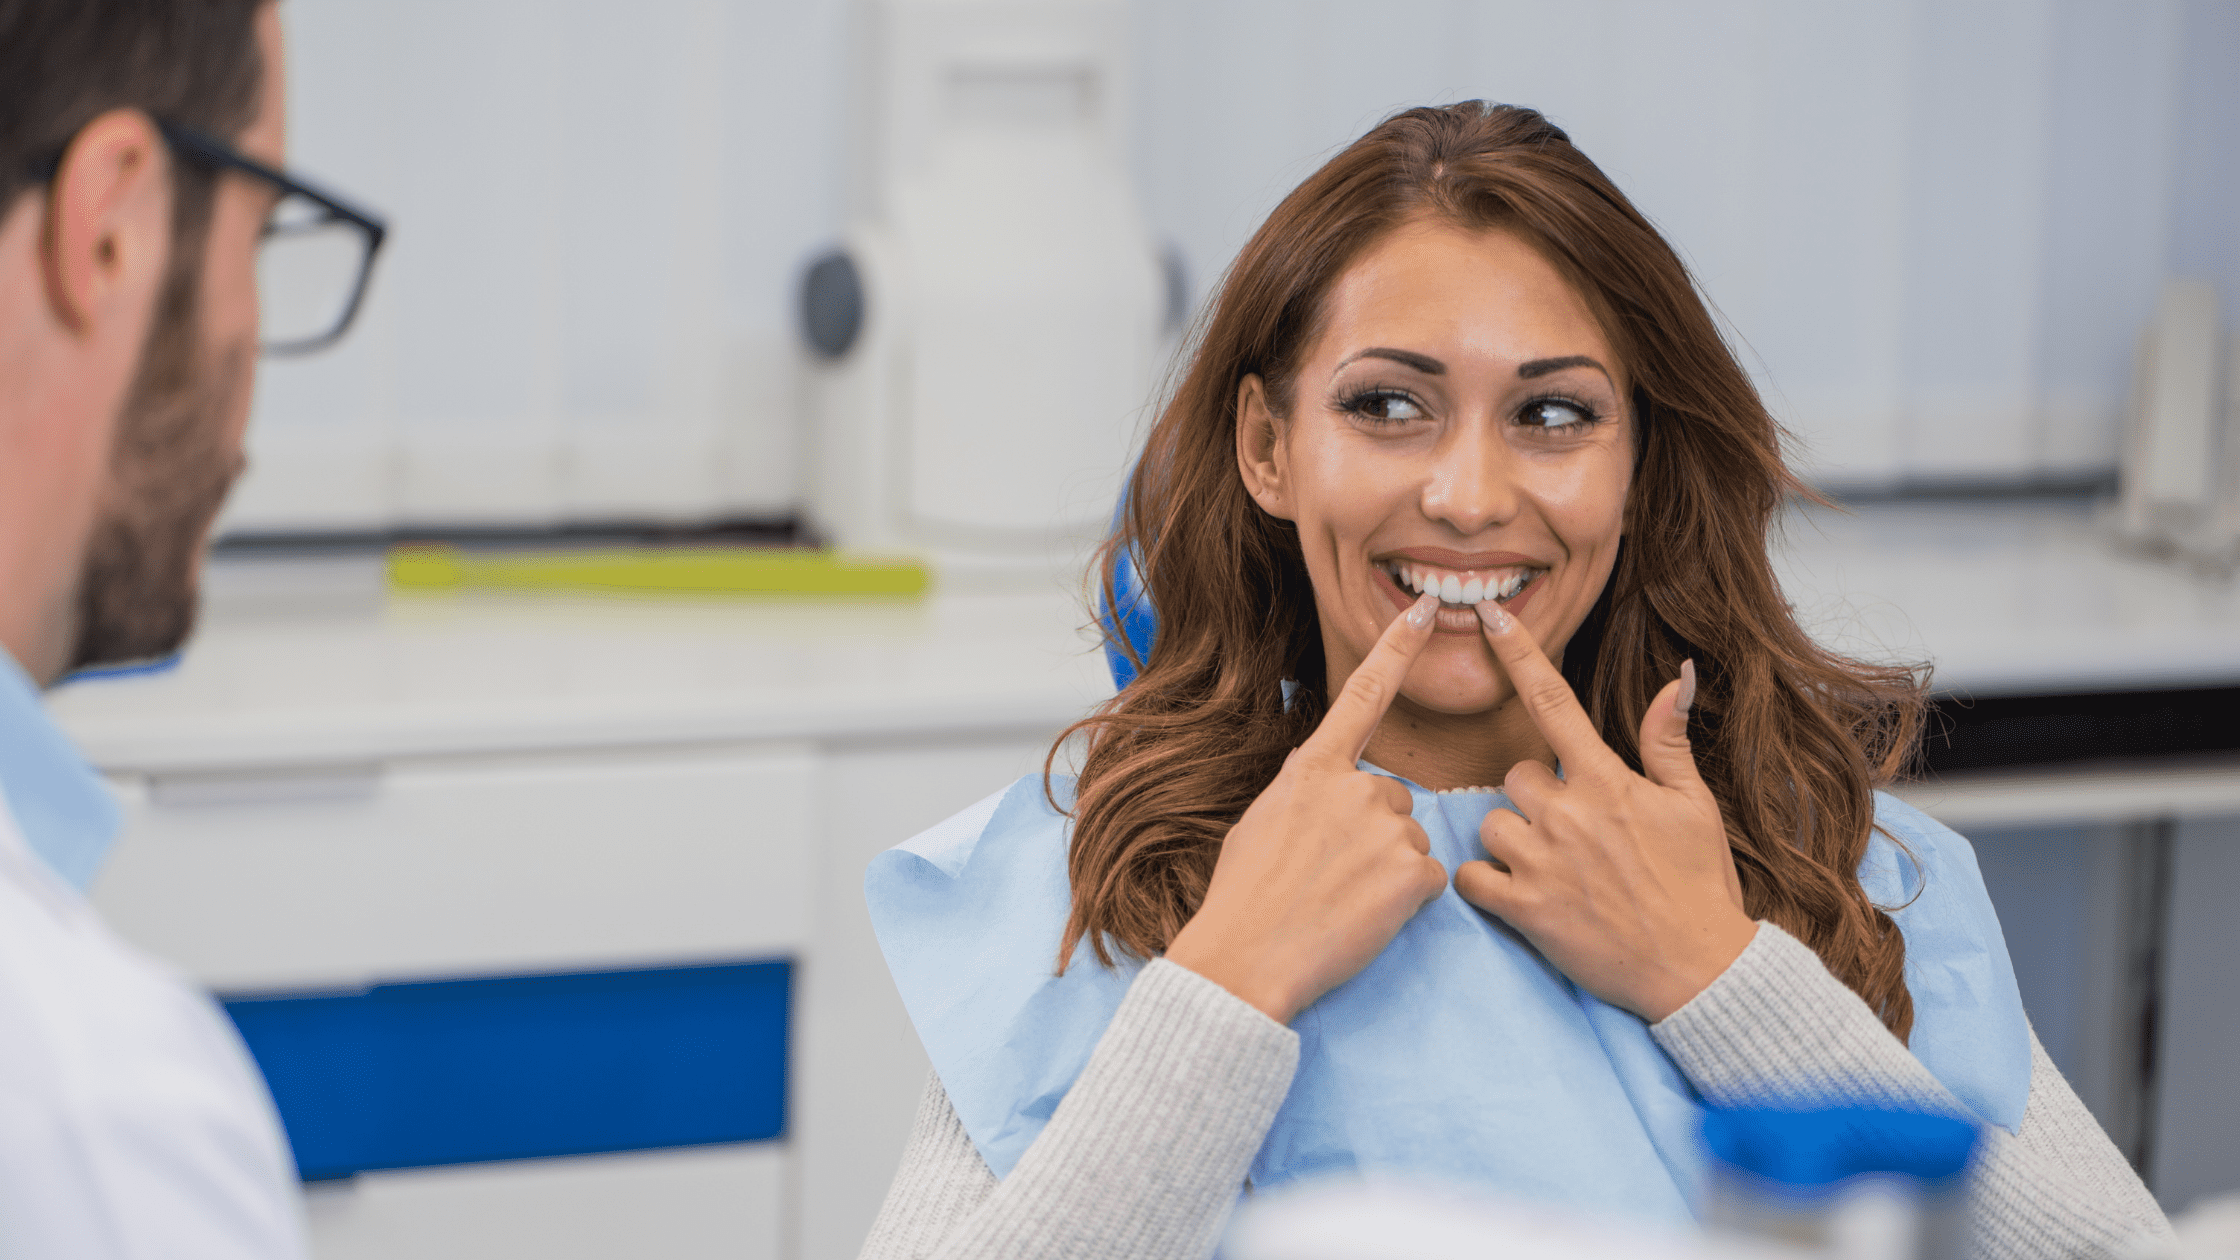 How often should you go to the dentist?